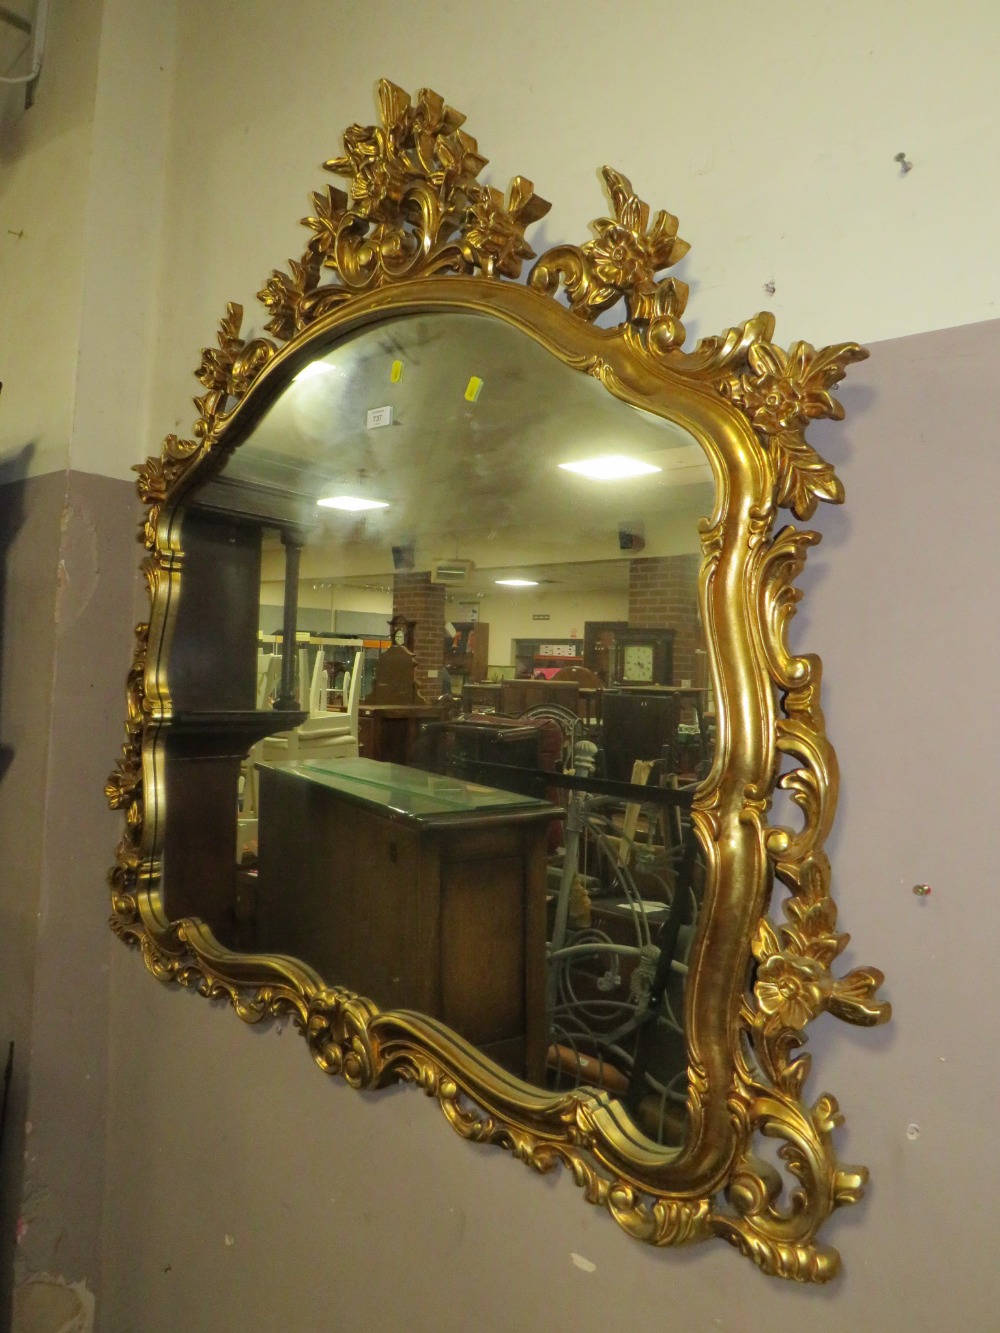 A LARGE GILT WALL MIRROR 115 X 122 CM - Image 2 of 2